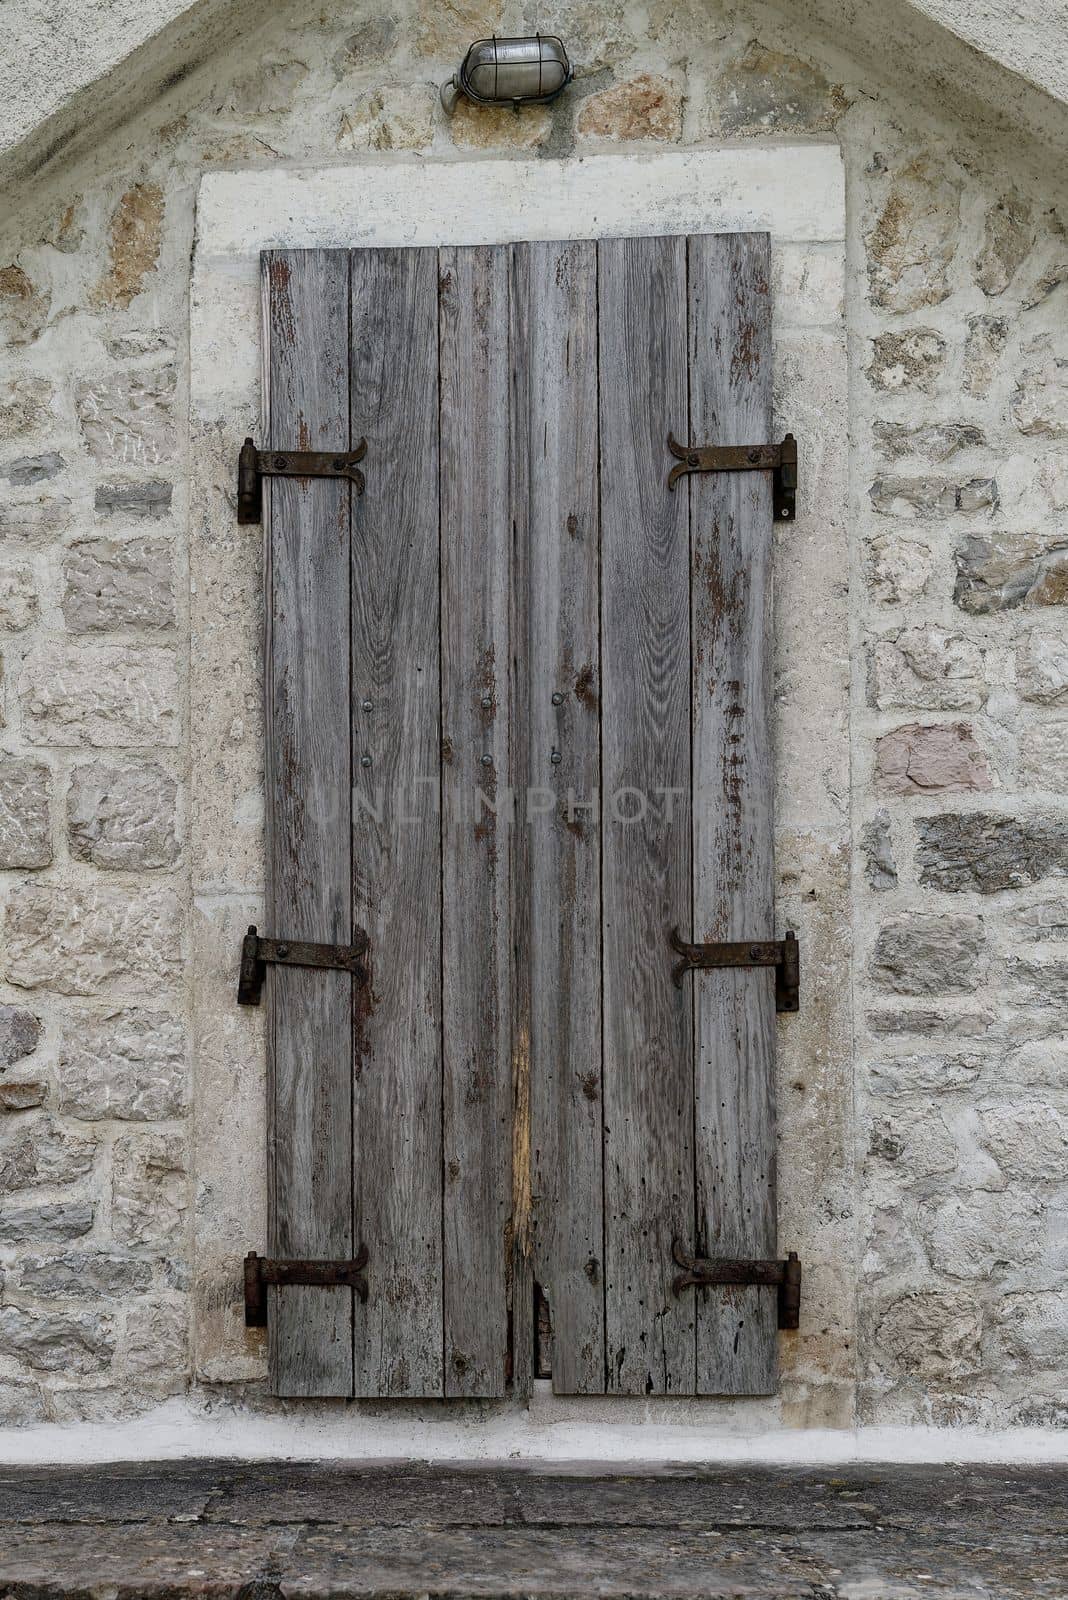 An old weathered, rustic wooden entrance gate made of two wings with solid fittings and an old lamp above the door.